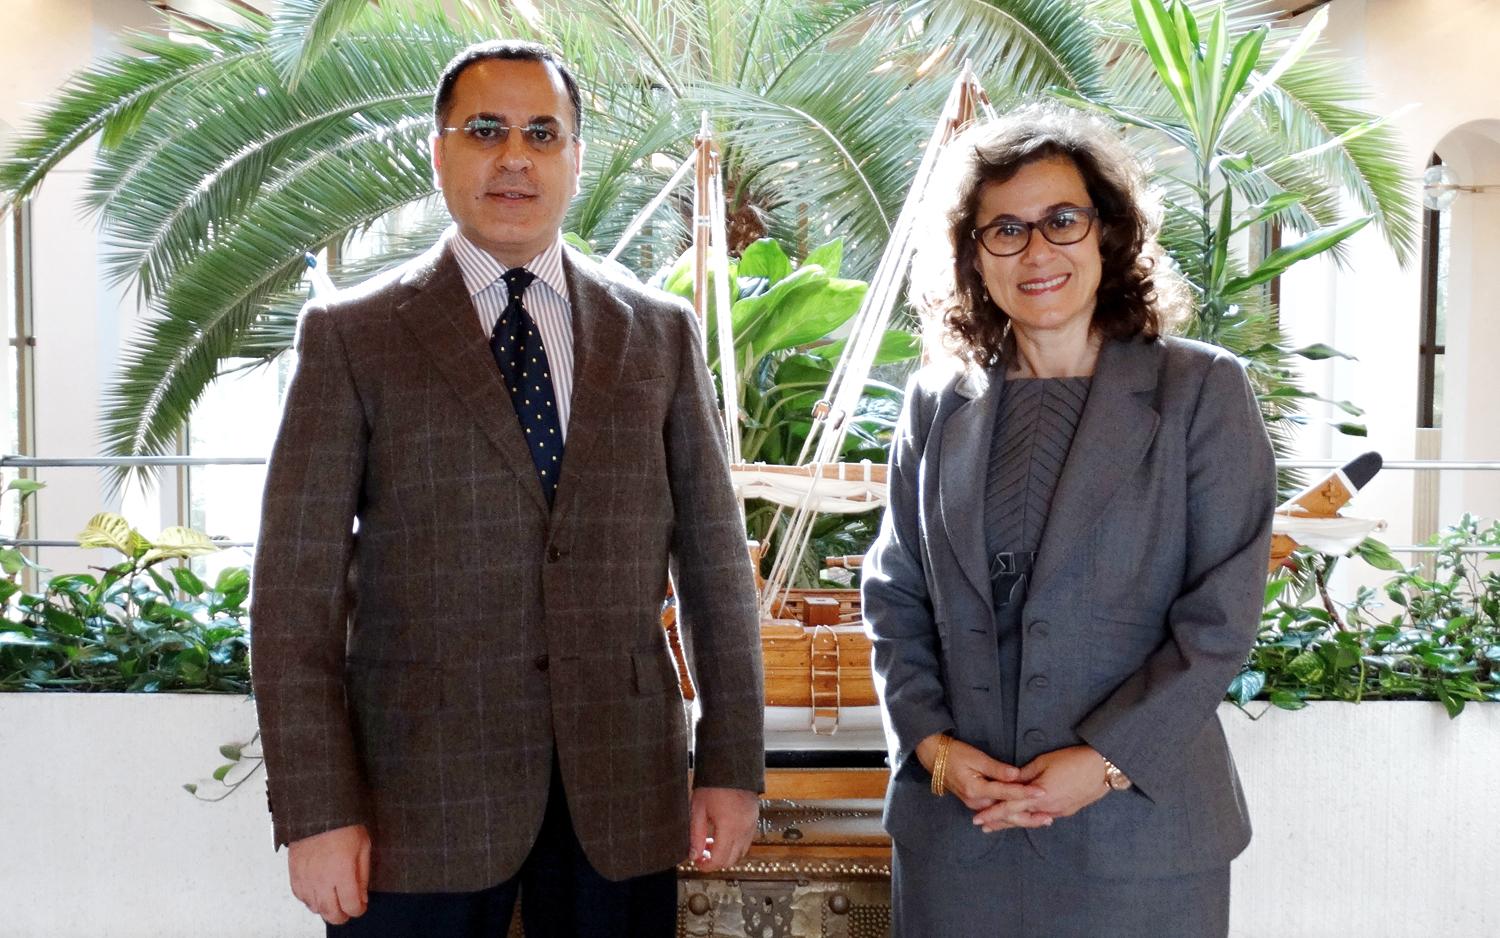 Regional Director for the Arab States, Nada Al-Nashef and Jamal Al-Ghunaim, Ambassador of the Permanent Mission of the State of Kuwait to the United Nations